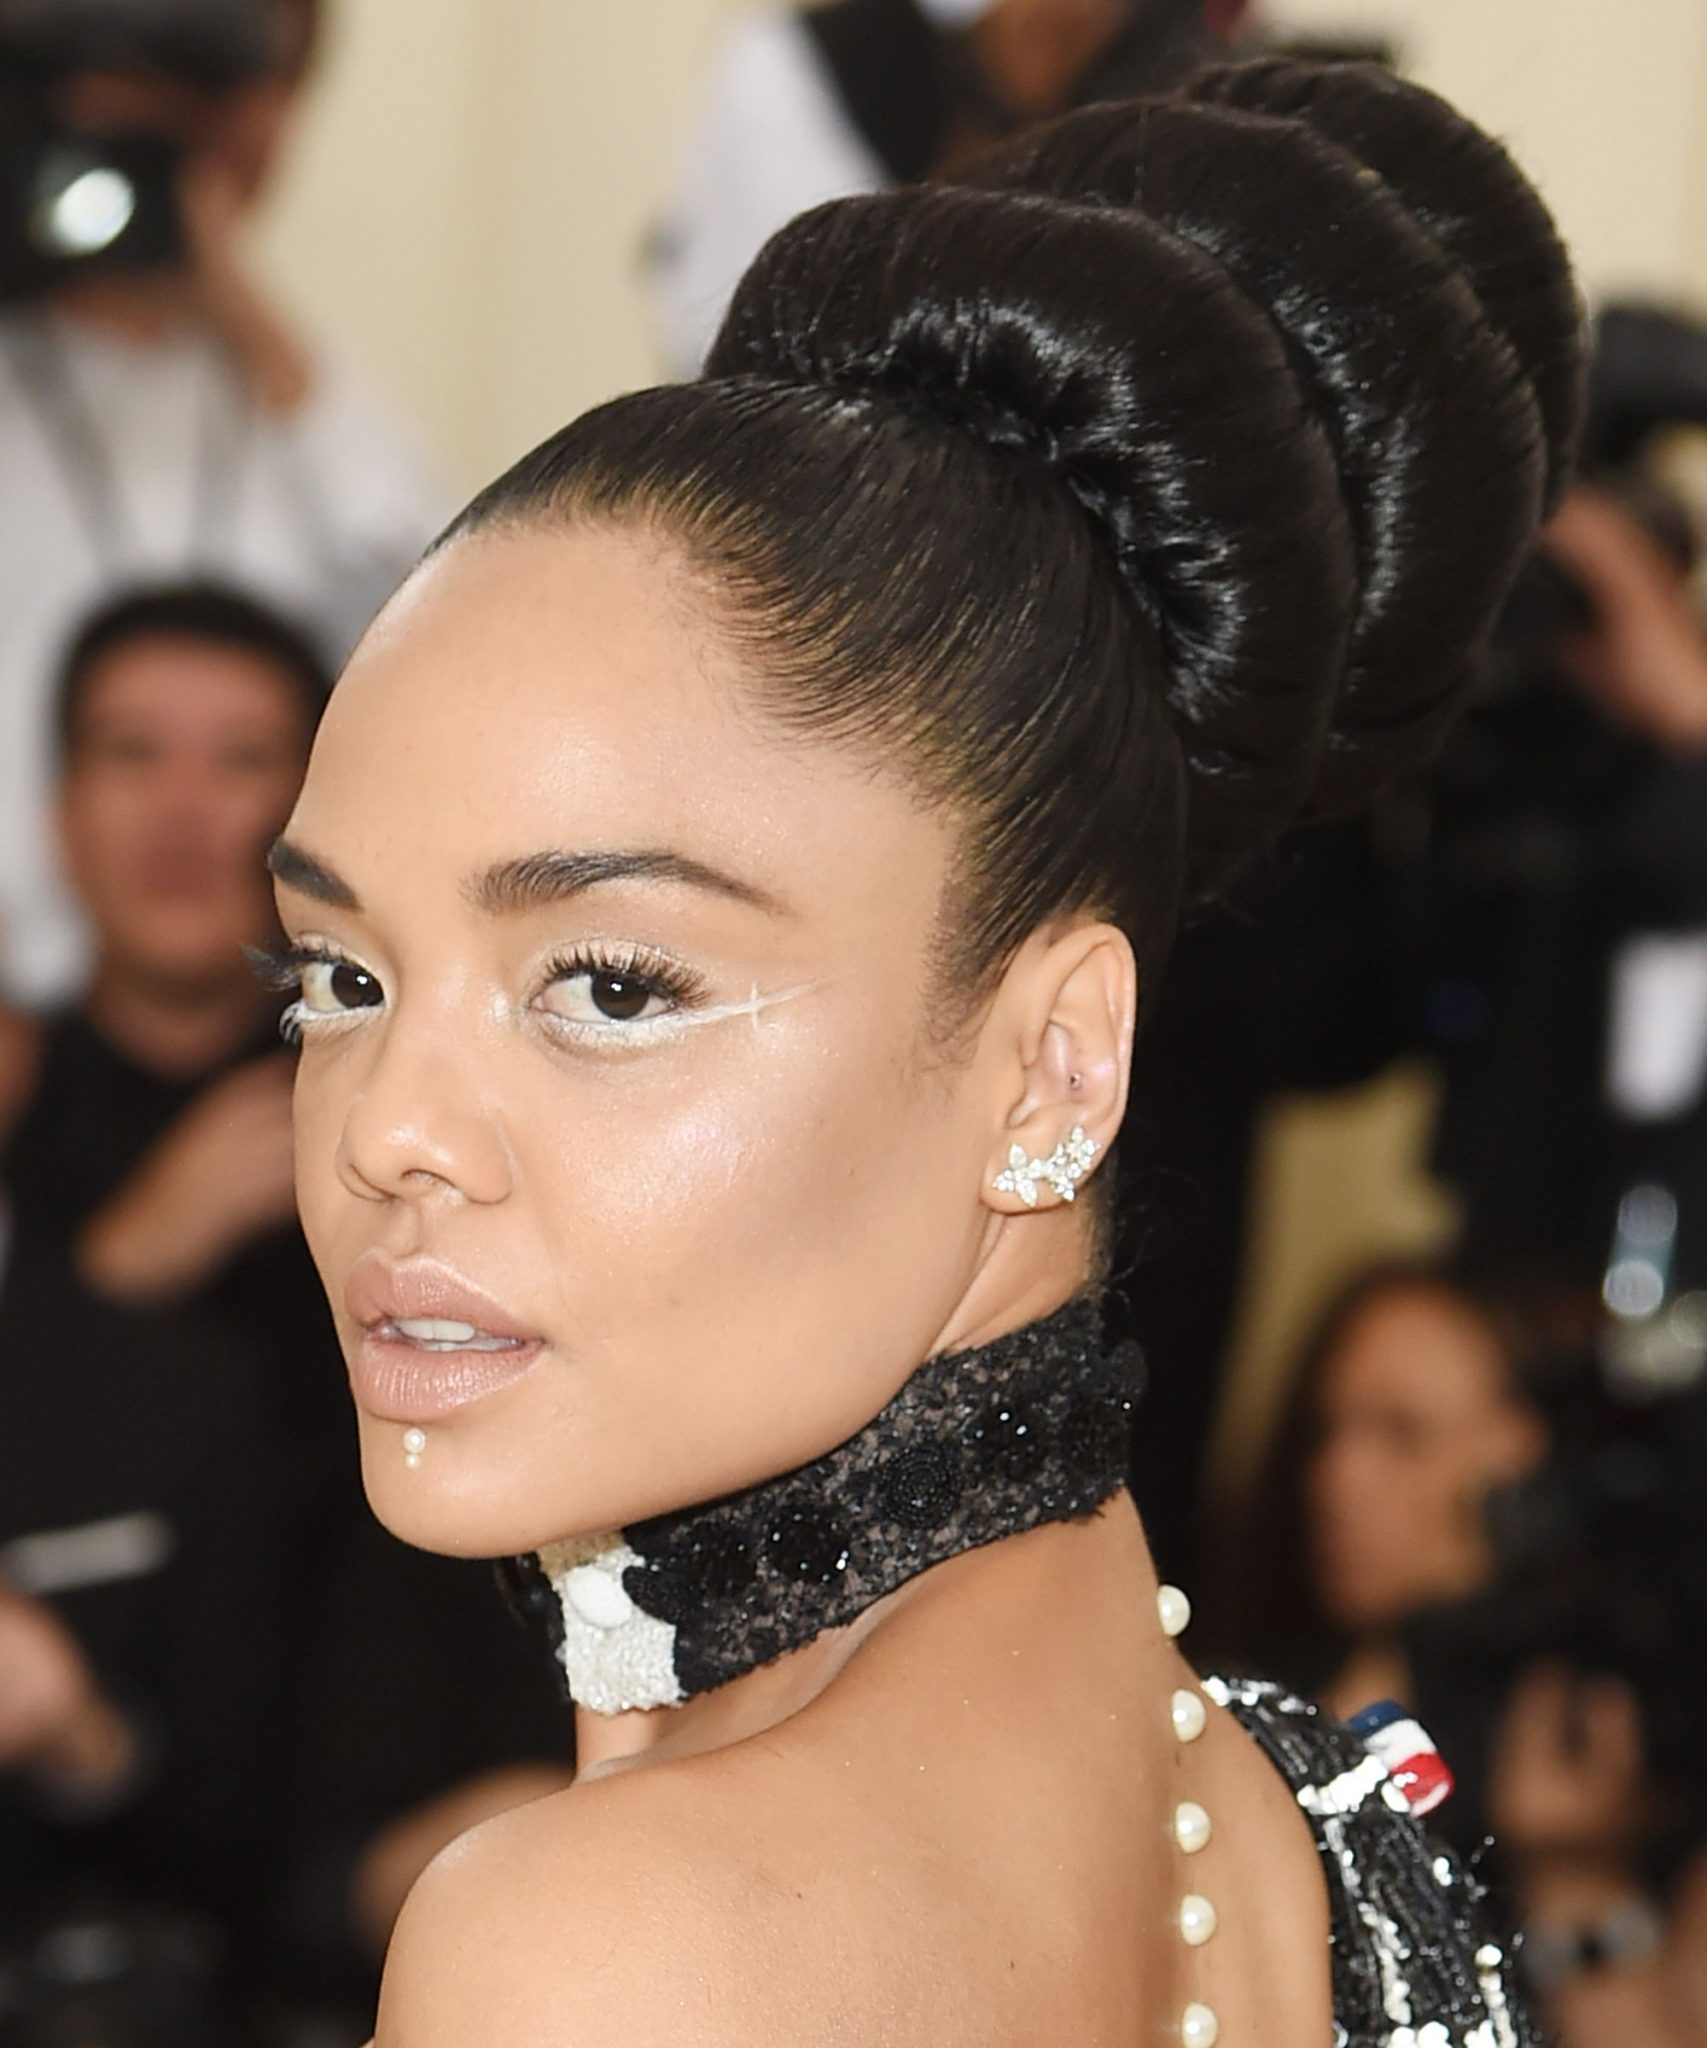 tessa thompson’s beauty evolution is one for the books